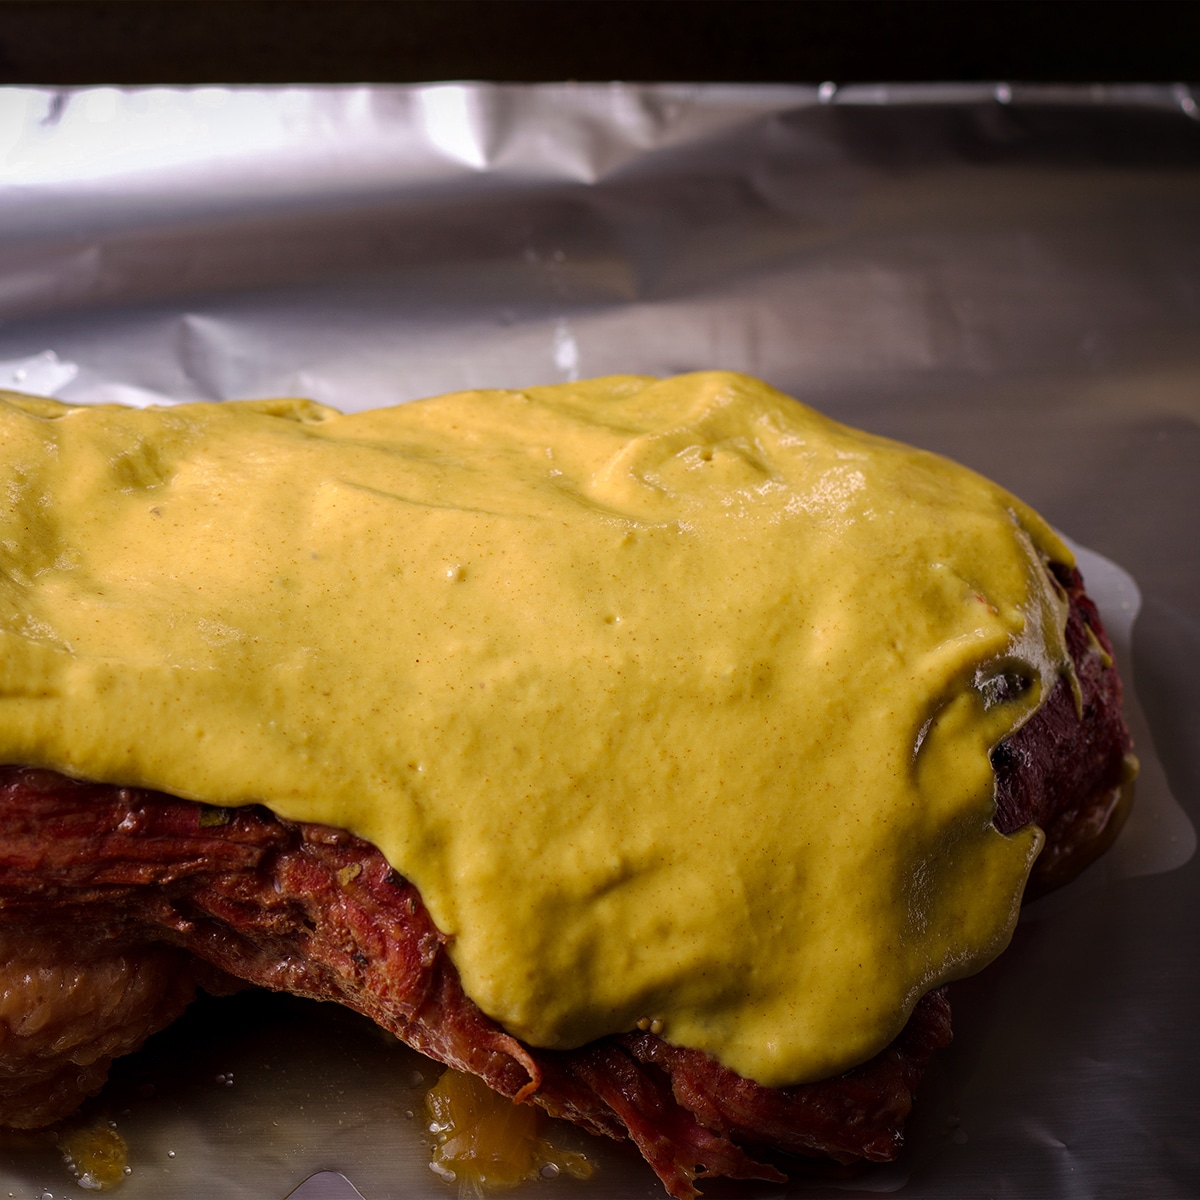 Someone spreading mustard sauce on a cooked corned beef on a baking sheet.